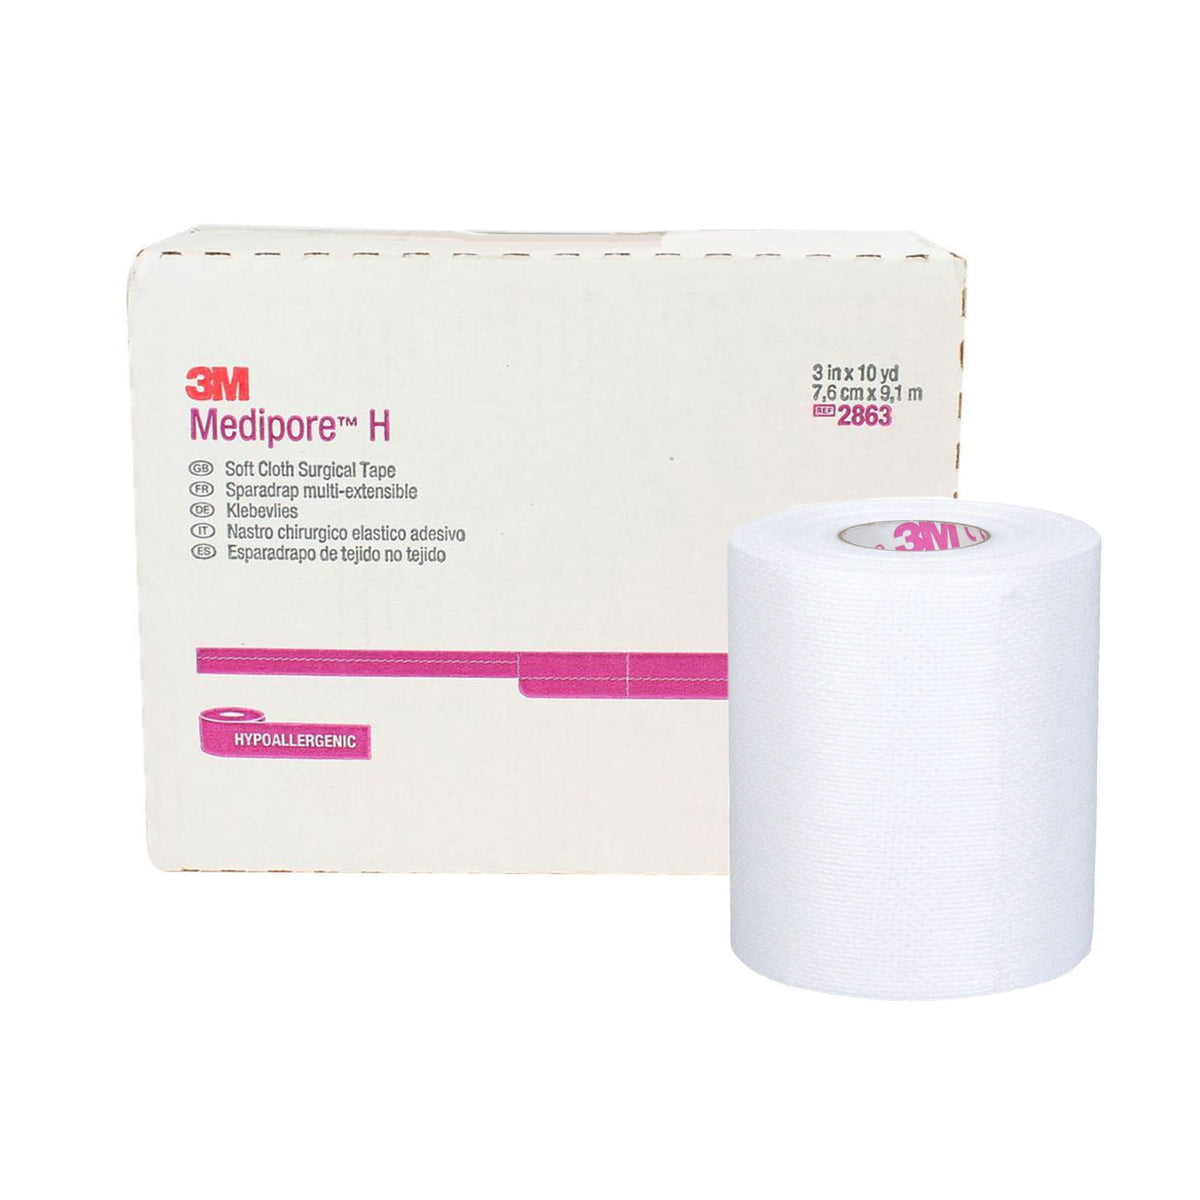 3M Medipore Soft Cloth White Surgical Tapes - American Hospital Supply